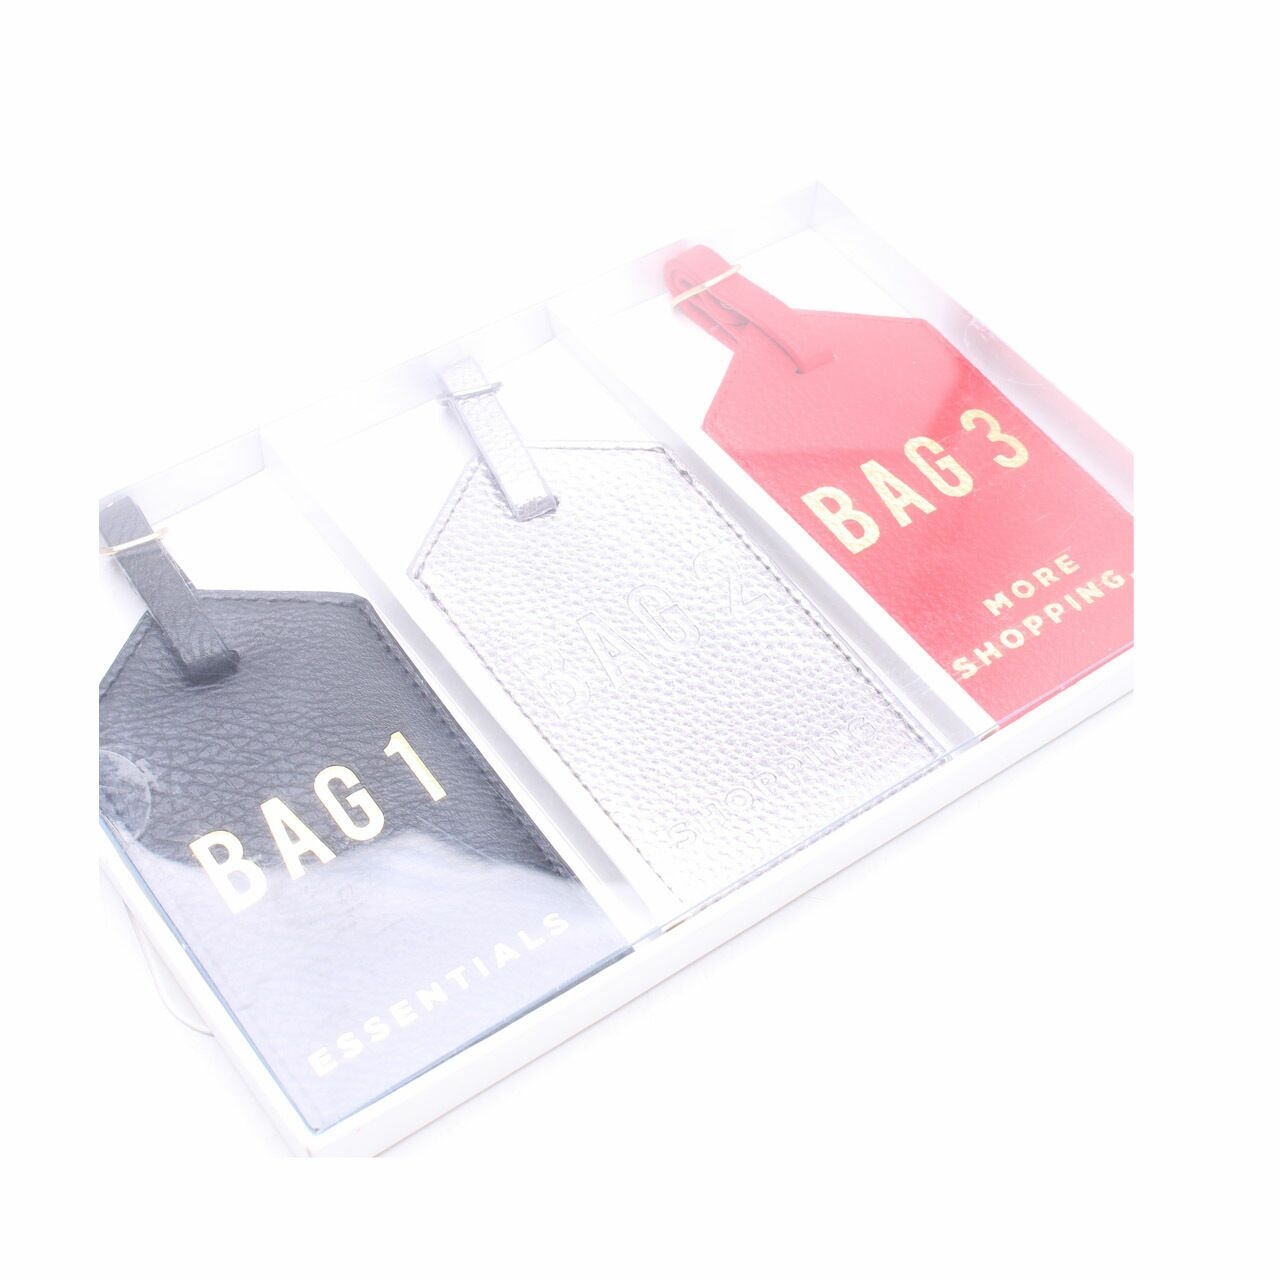 Typo Black Silver Red Laggage Tag Set Pack Of 3 Keychain